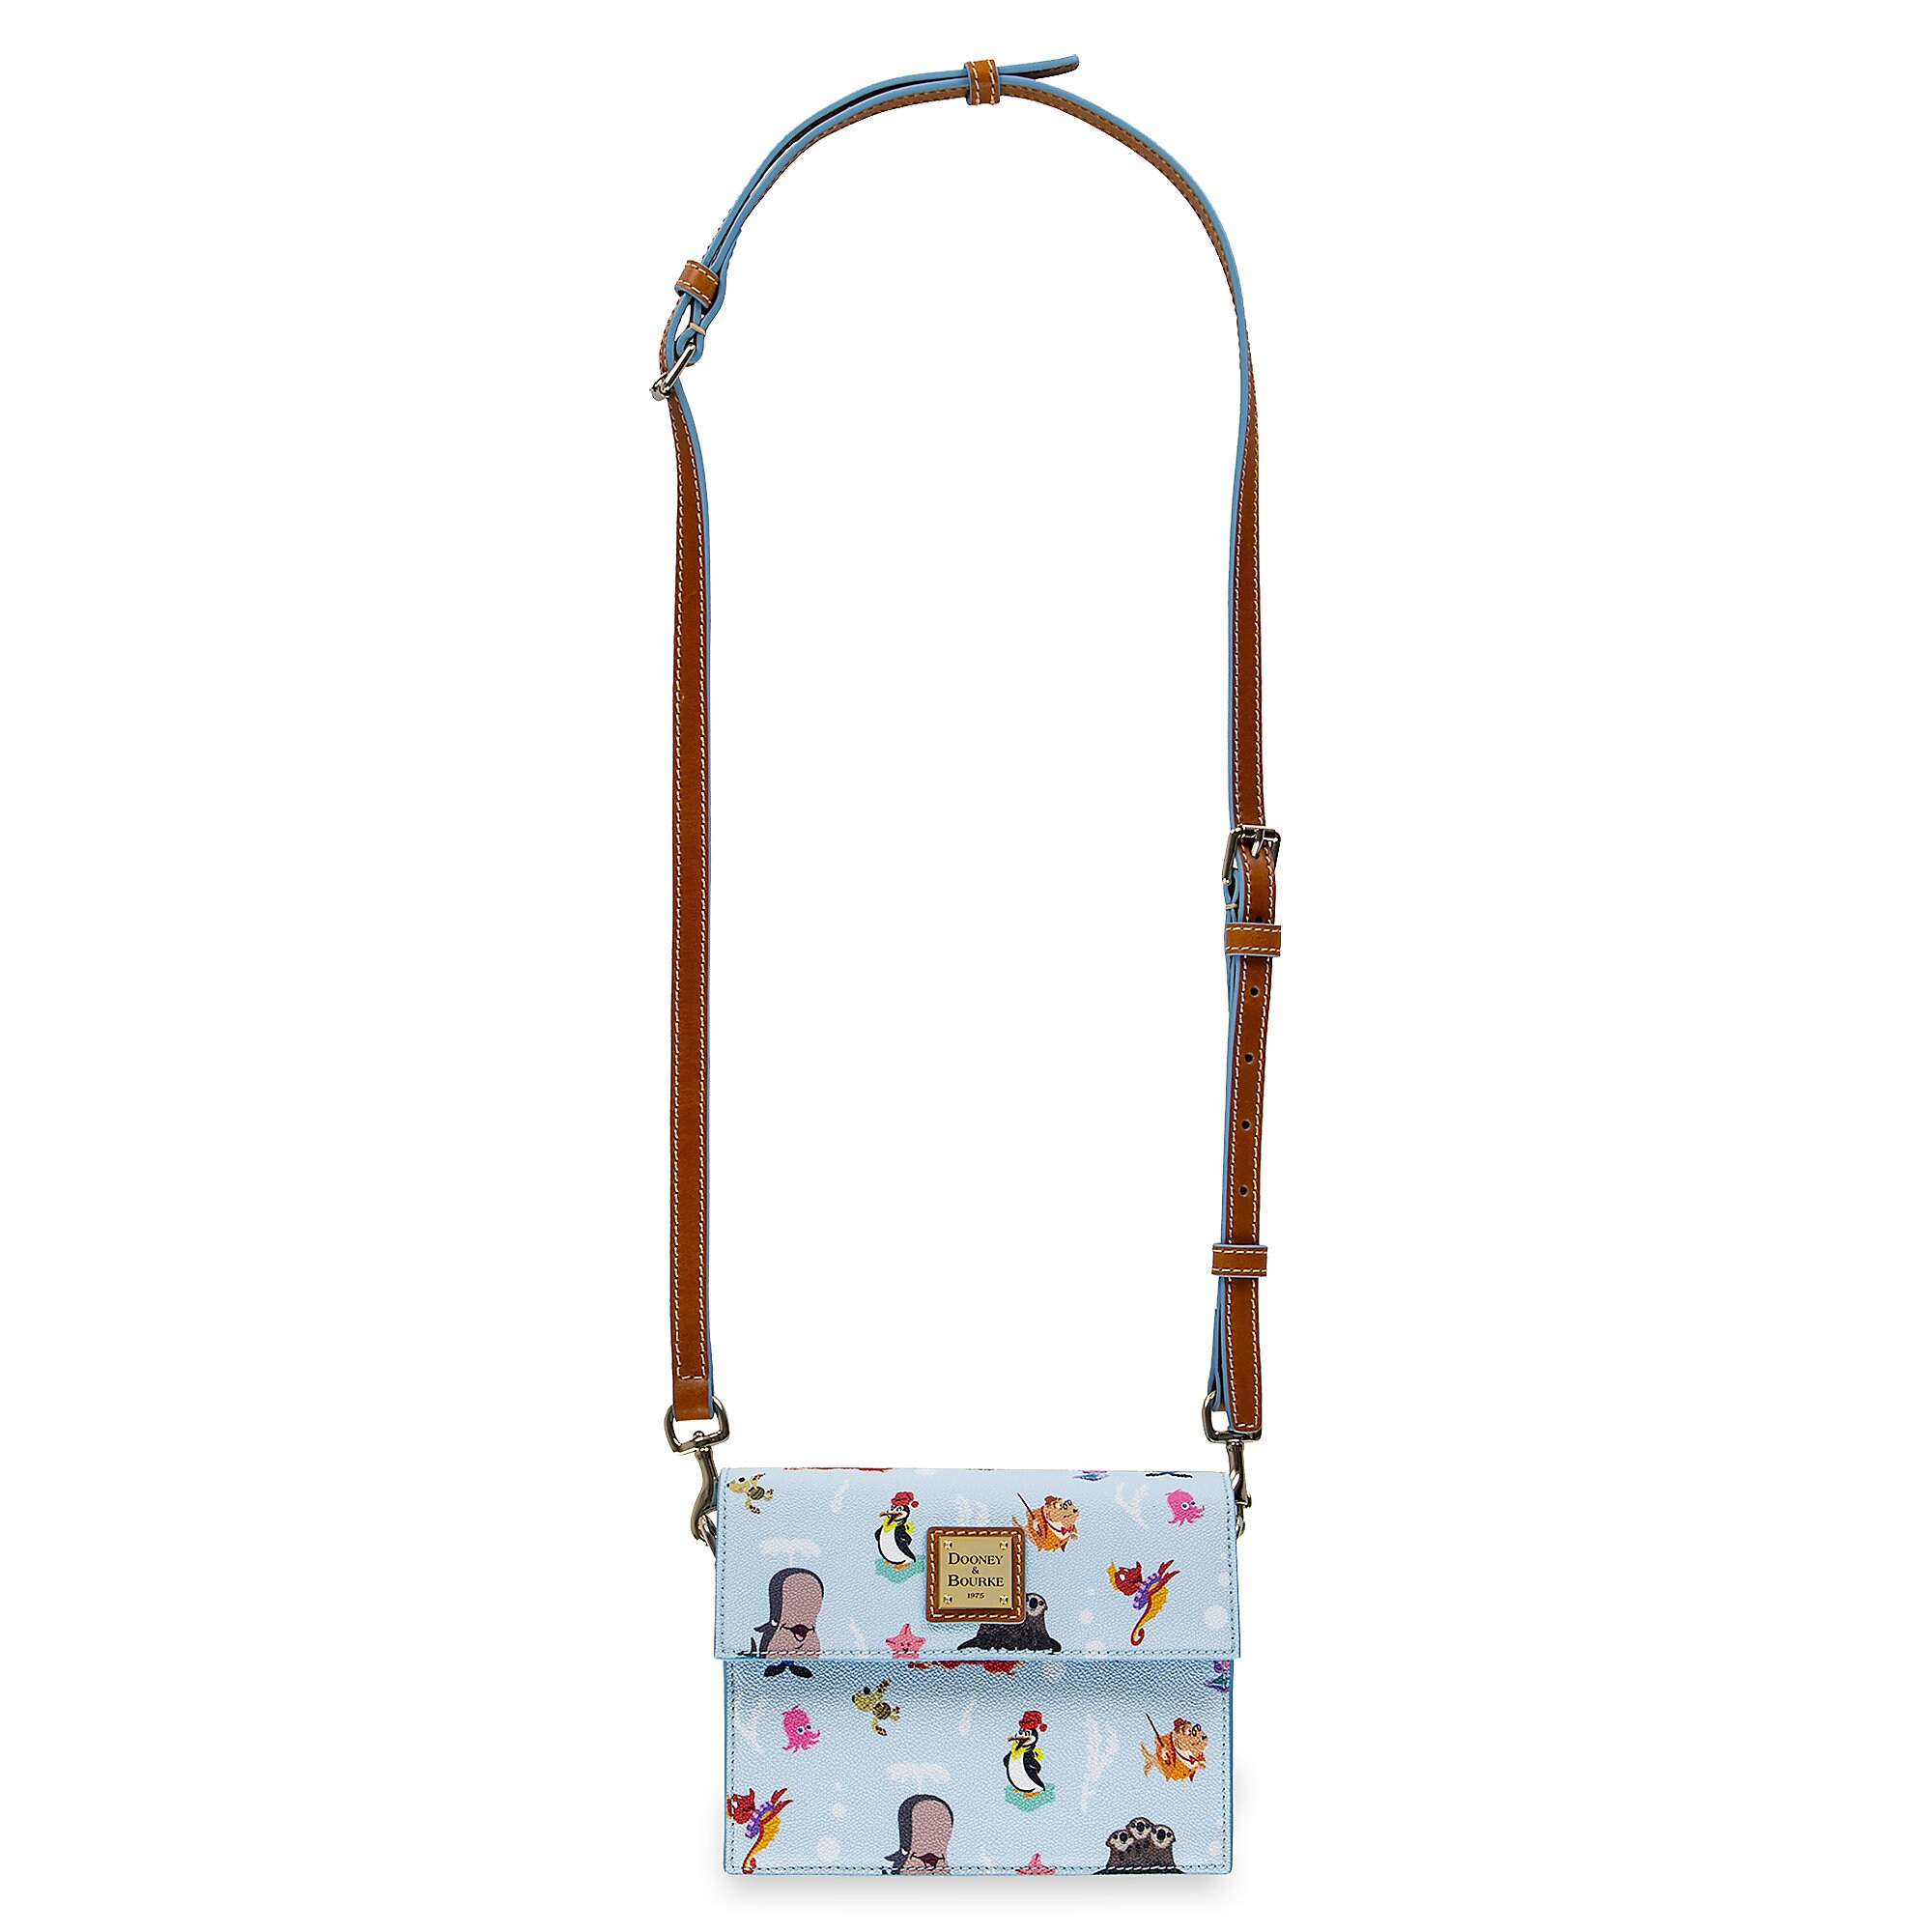 Out to Sea Crossbody Bag by Dooney & Bourke